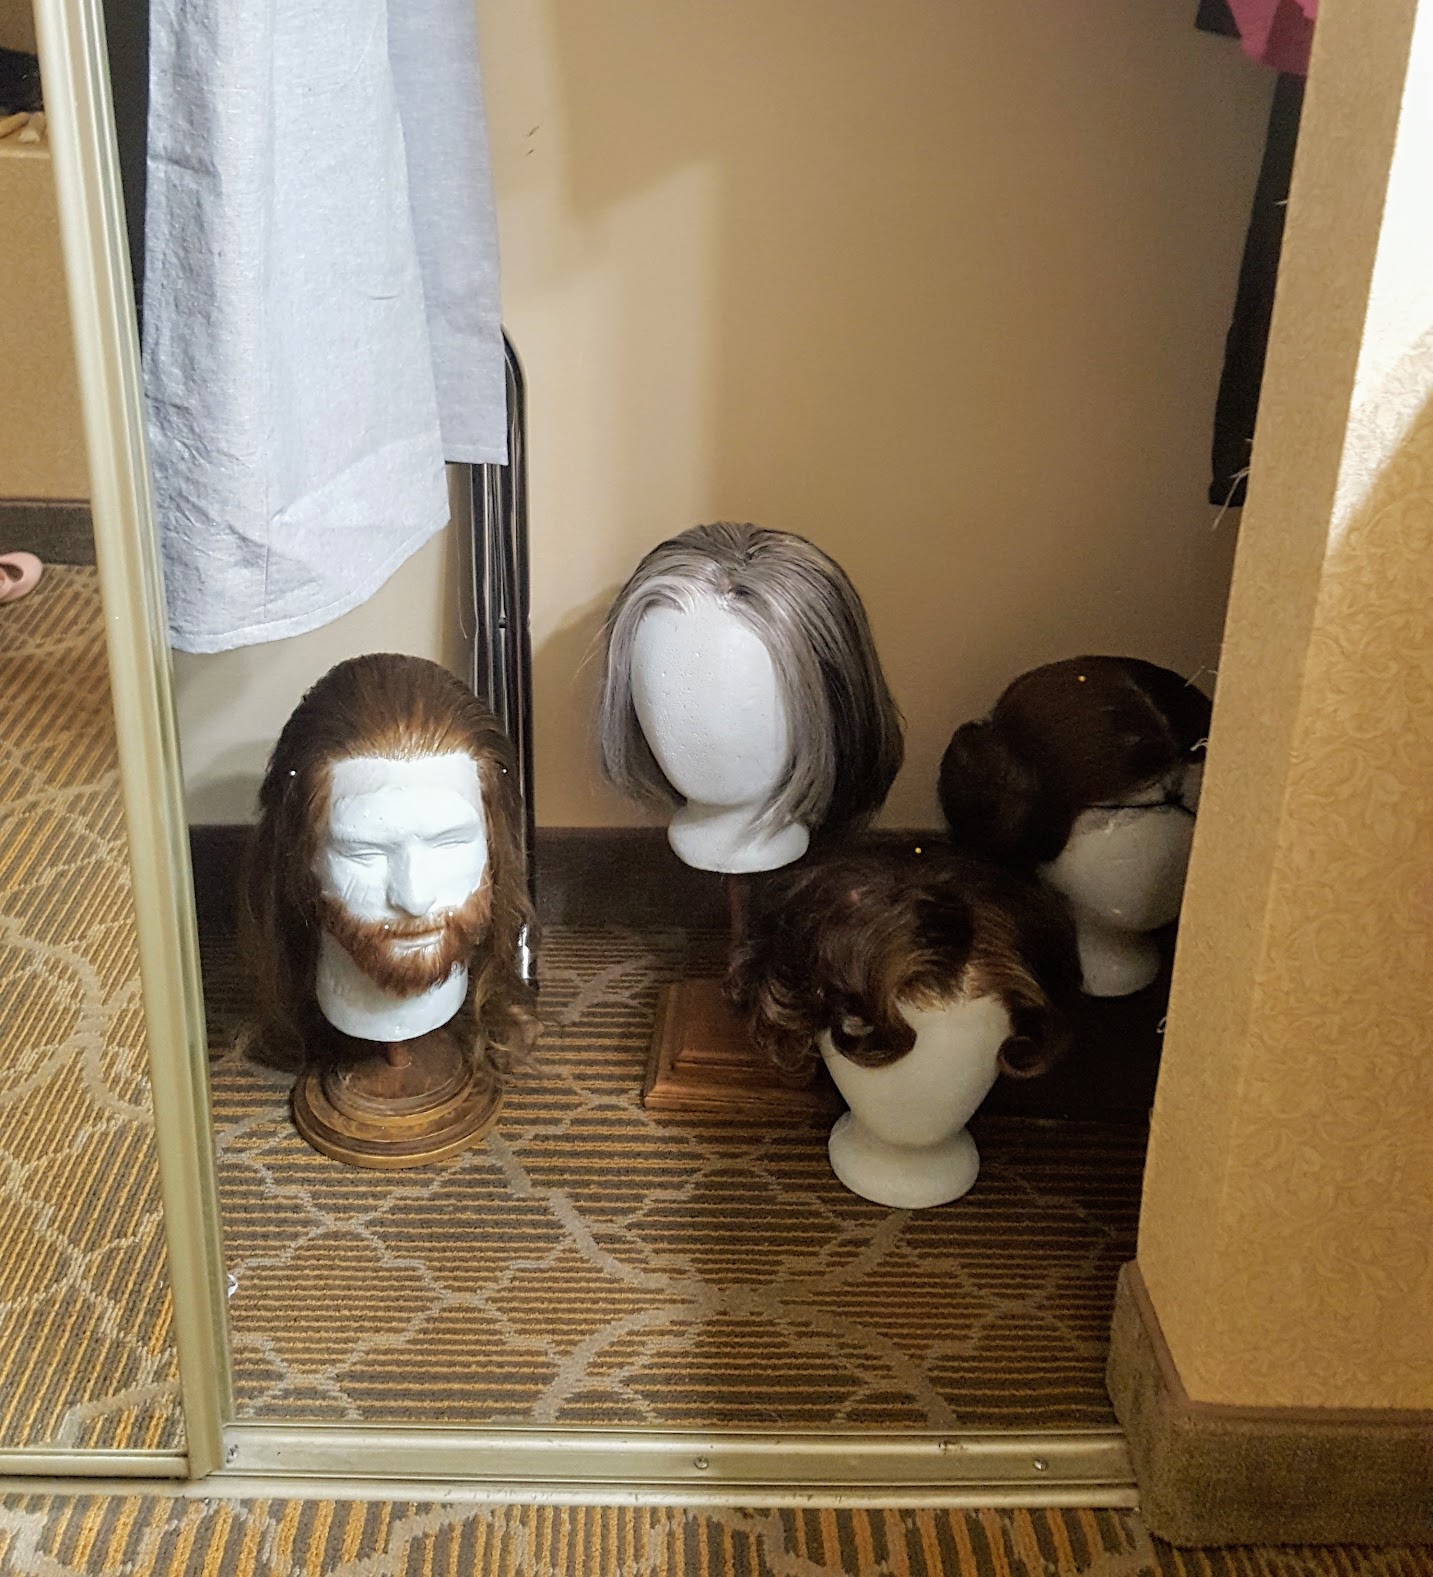 wigs stored on heads during a convention